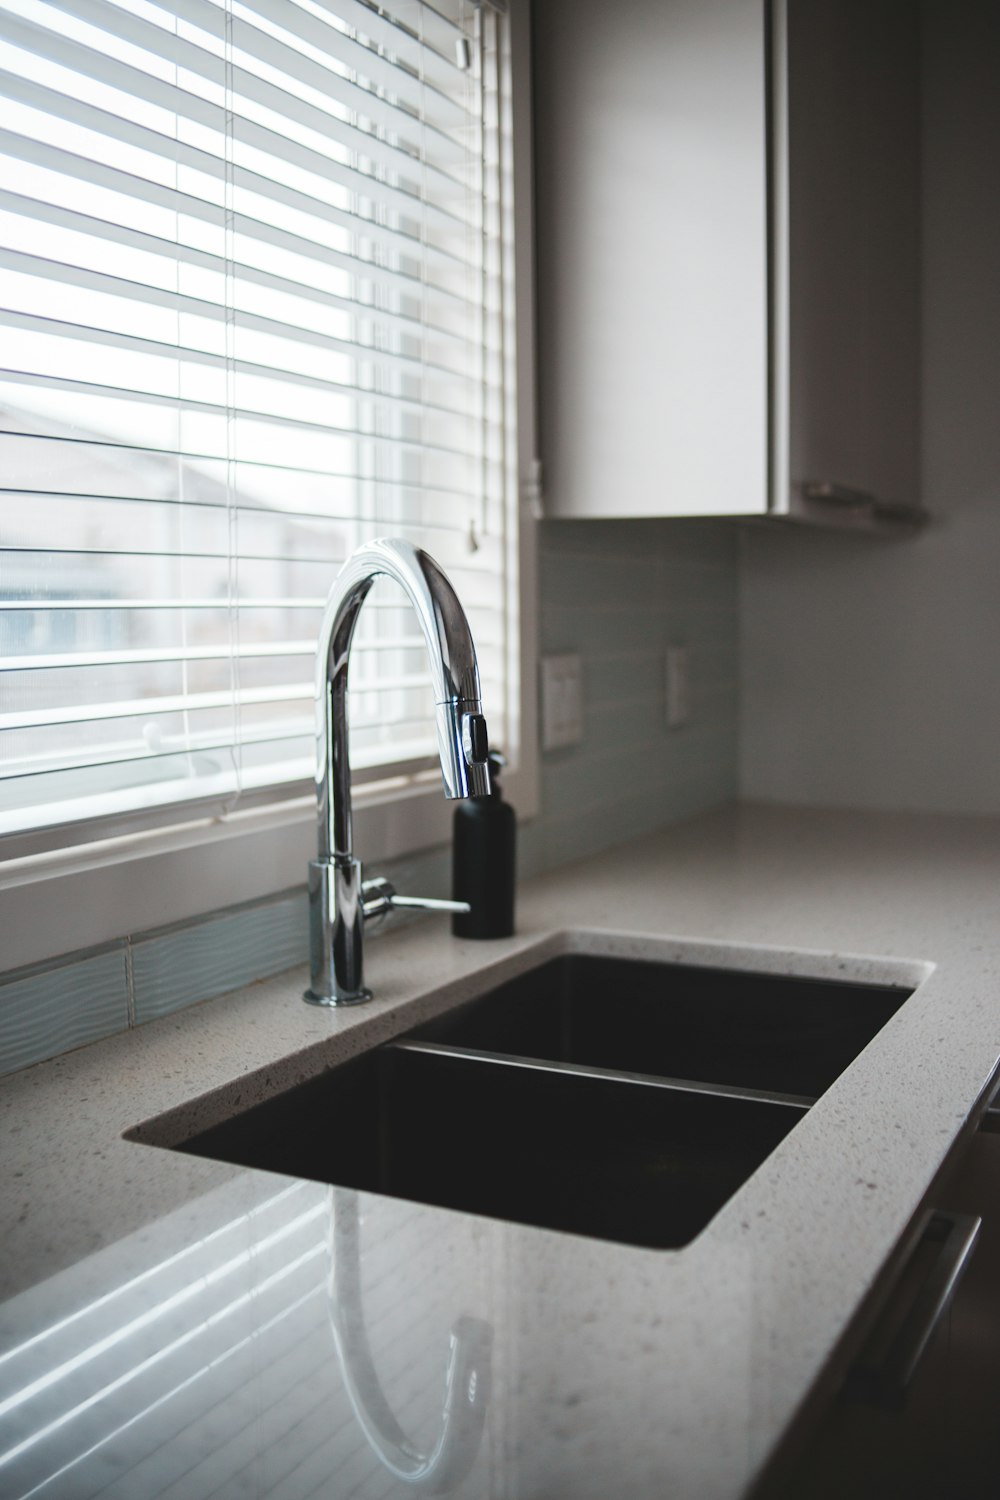 stainless steel faucet near white window blinds